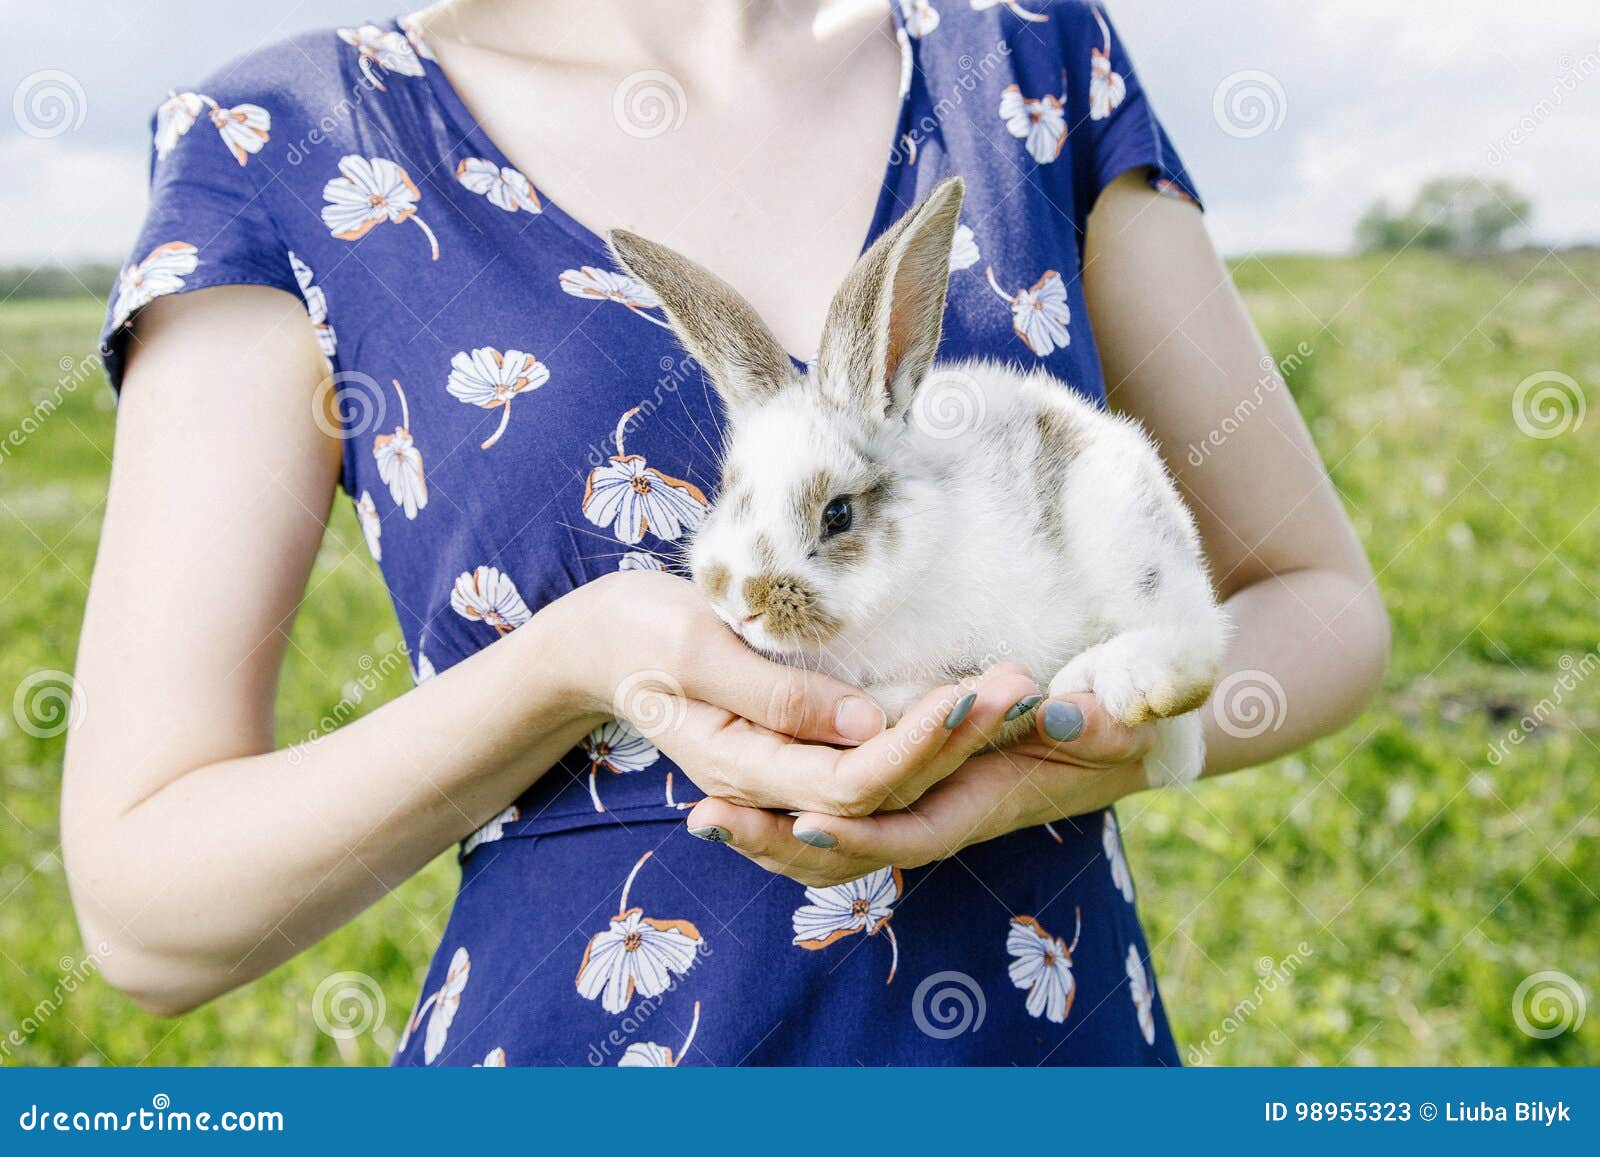 little rabbit, black and white suit, a bunny eating a green grass, a pet in a wooden box.